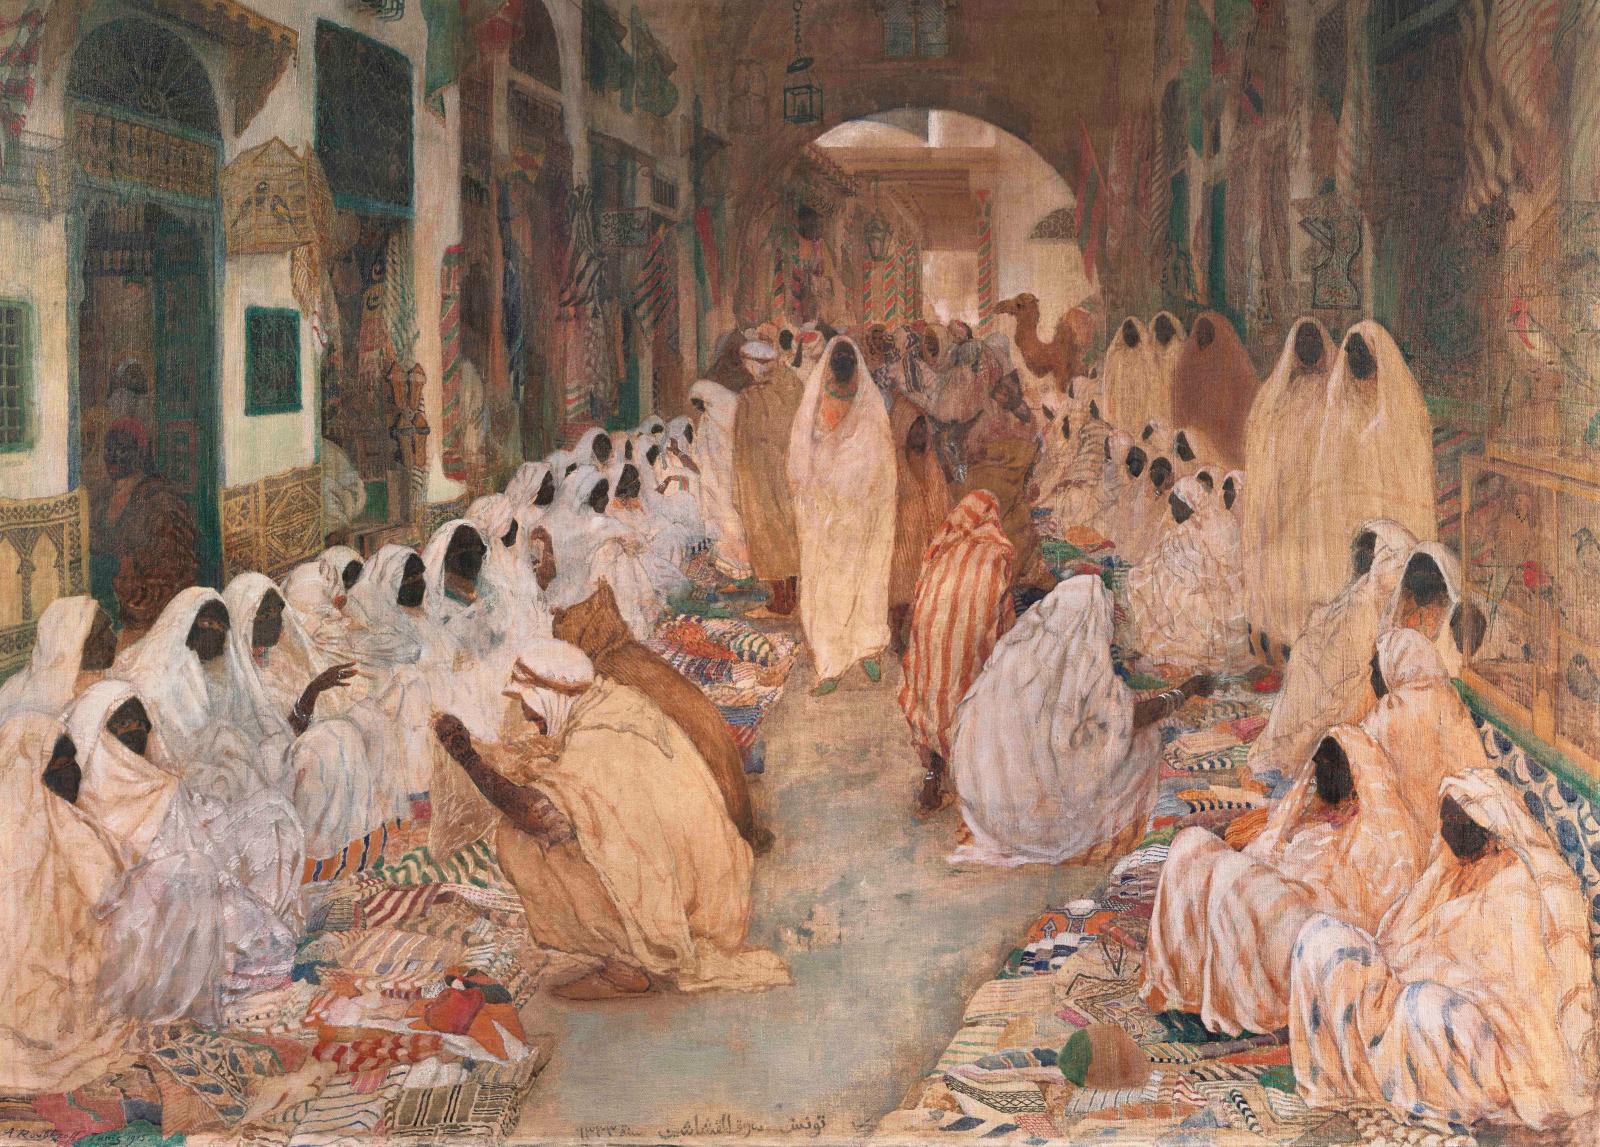 Alexandre Roubtzoff, a Russian Painter in the Souk of Tunis